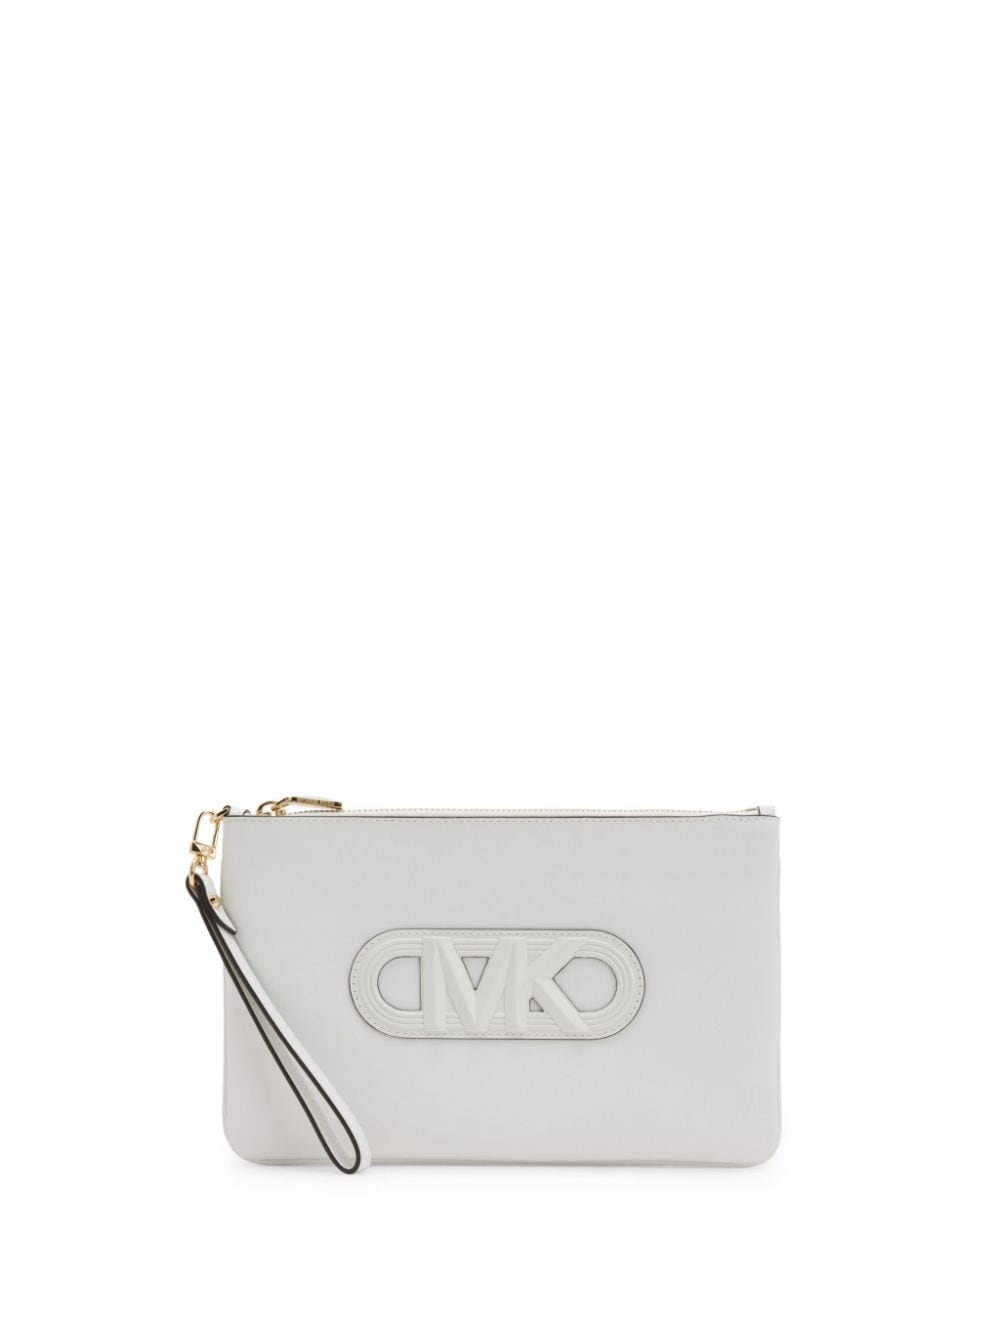 Michael Kors Large Jet Set Leather Clutch Bag In White